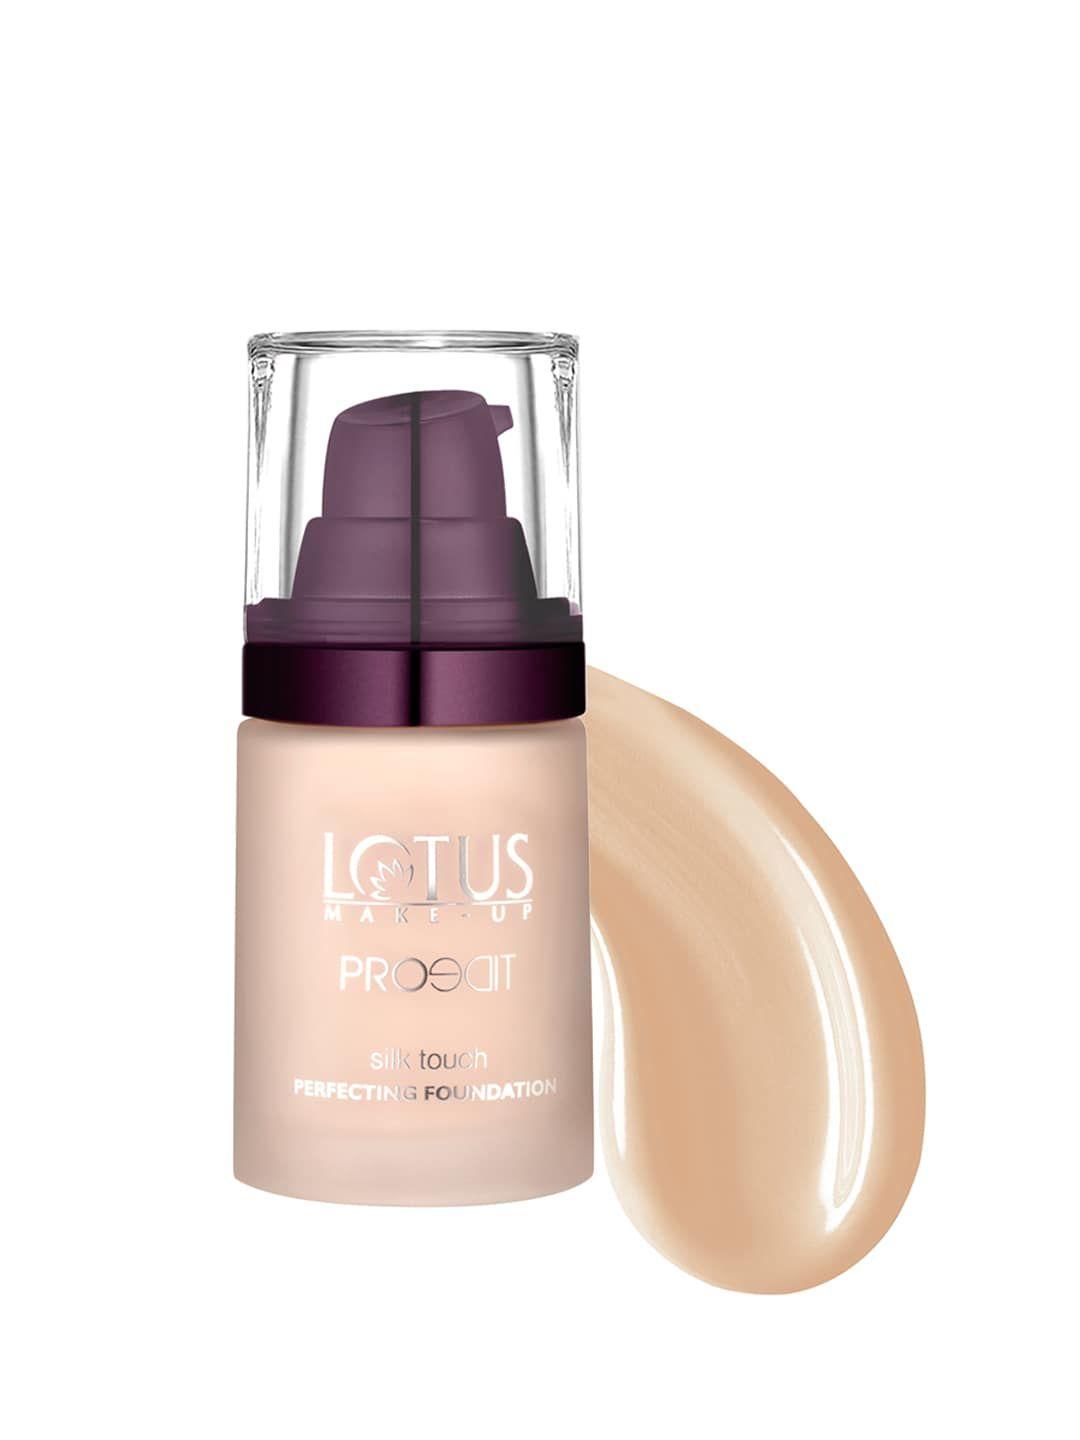 lotus herbals sustainable proedit silk touch perfecting foundation - porcelain sf01 30 ml